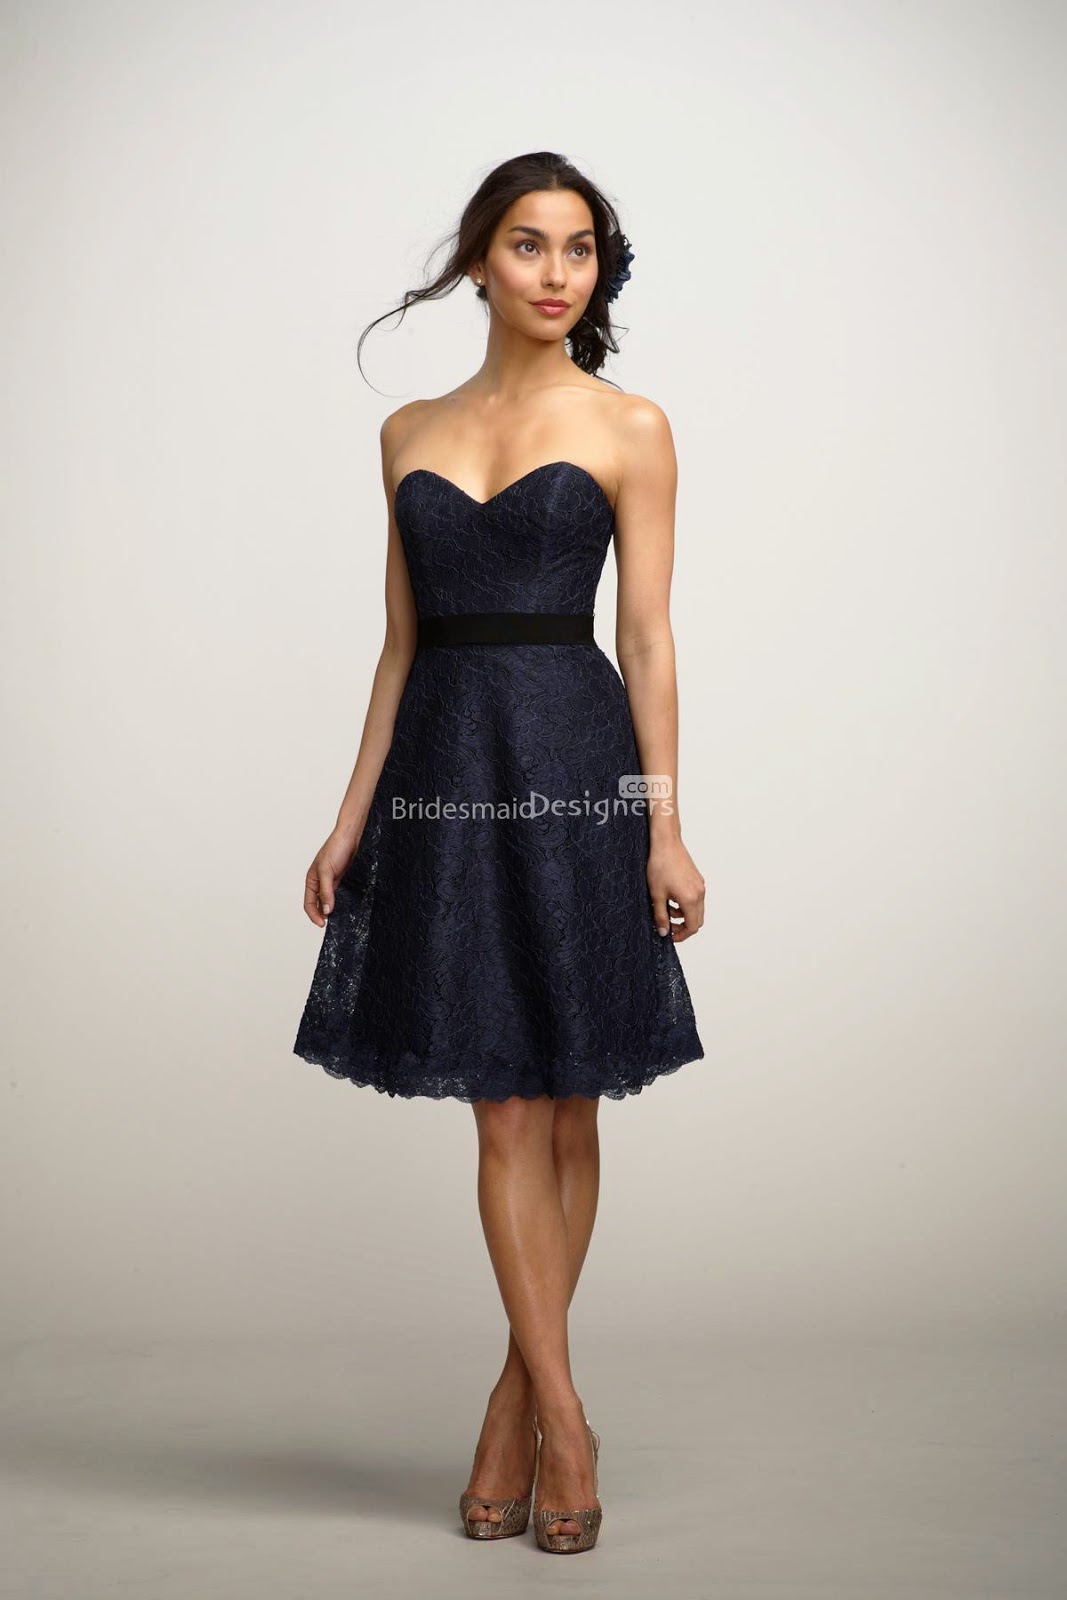 http://www.bridesmaiddesigners.com/navy-blue-a-line-sweetheart-knee-length-bridesmaid-dress-with-lace-covered-373.html